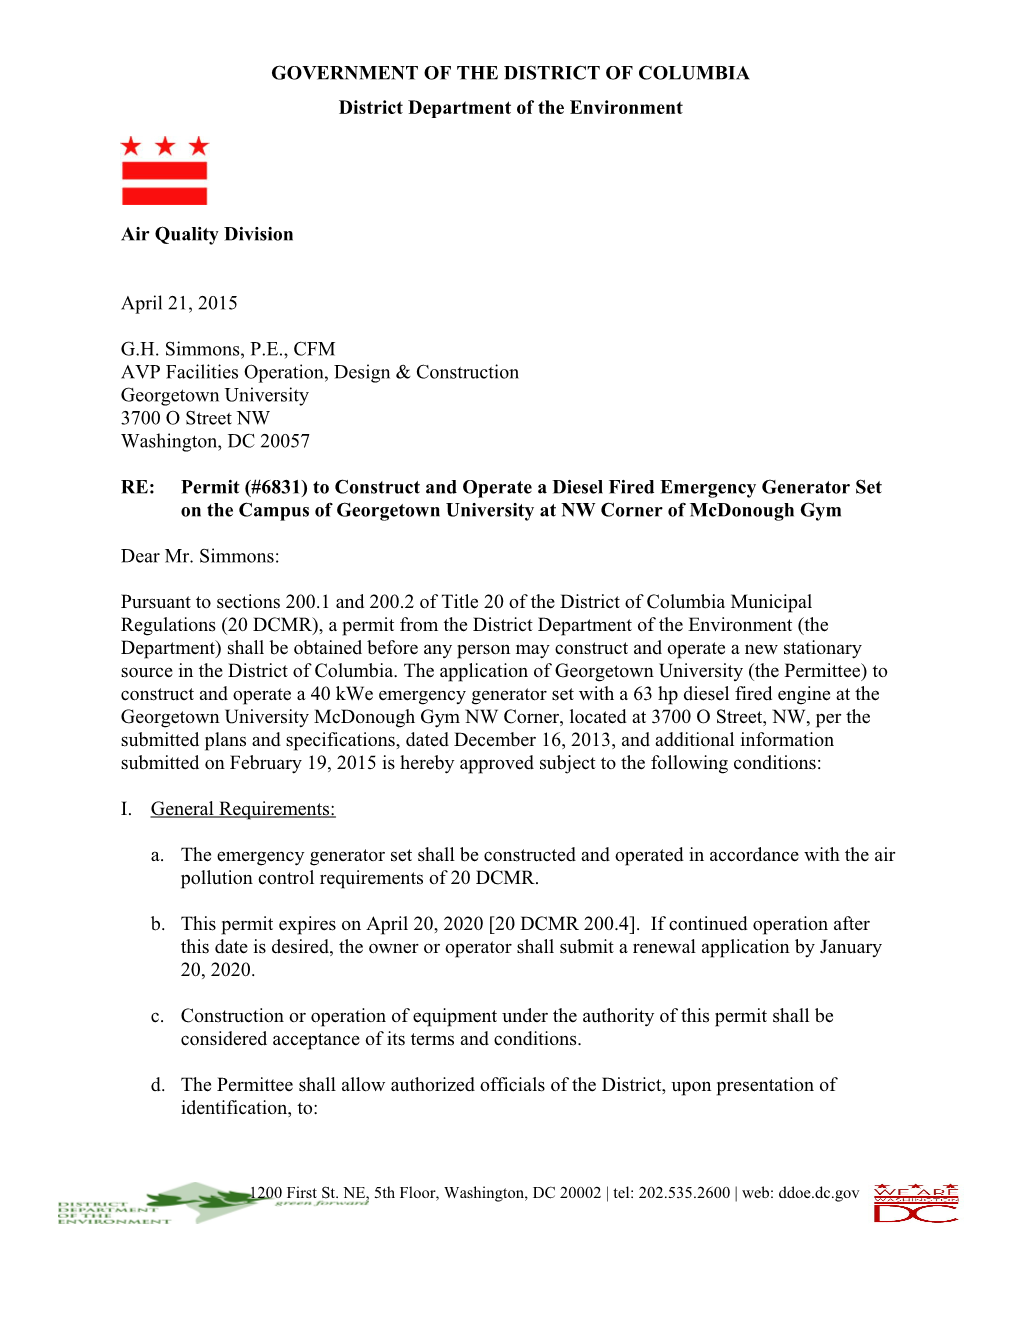 Permit (#6831) to Construct and Operate a Diesel Fired Emergency Generator